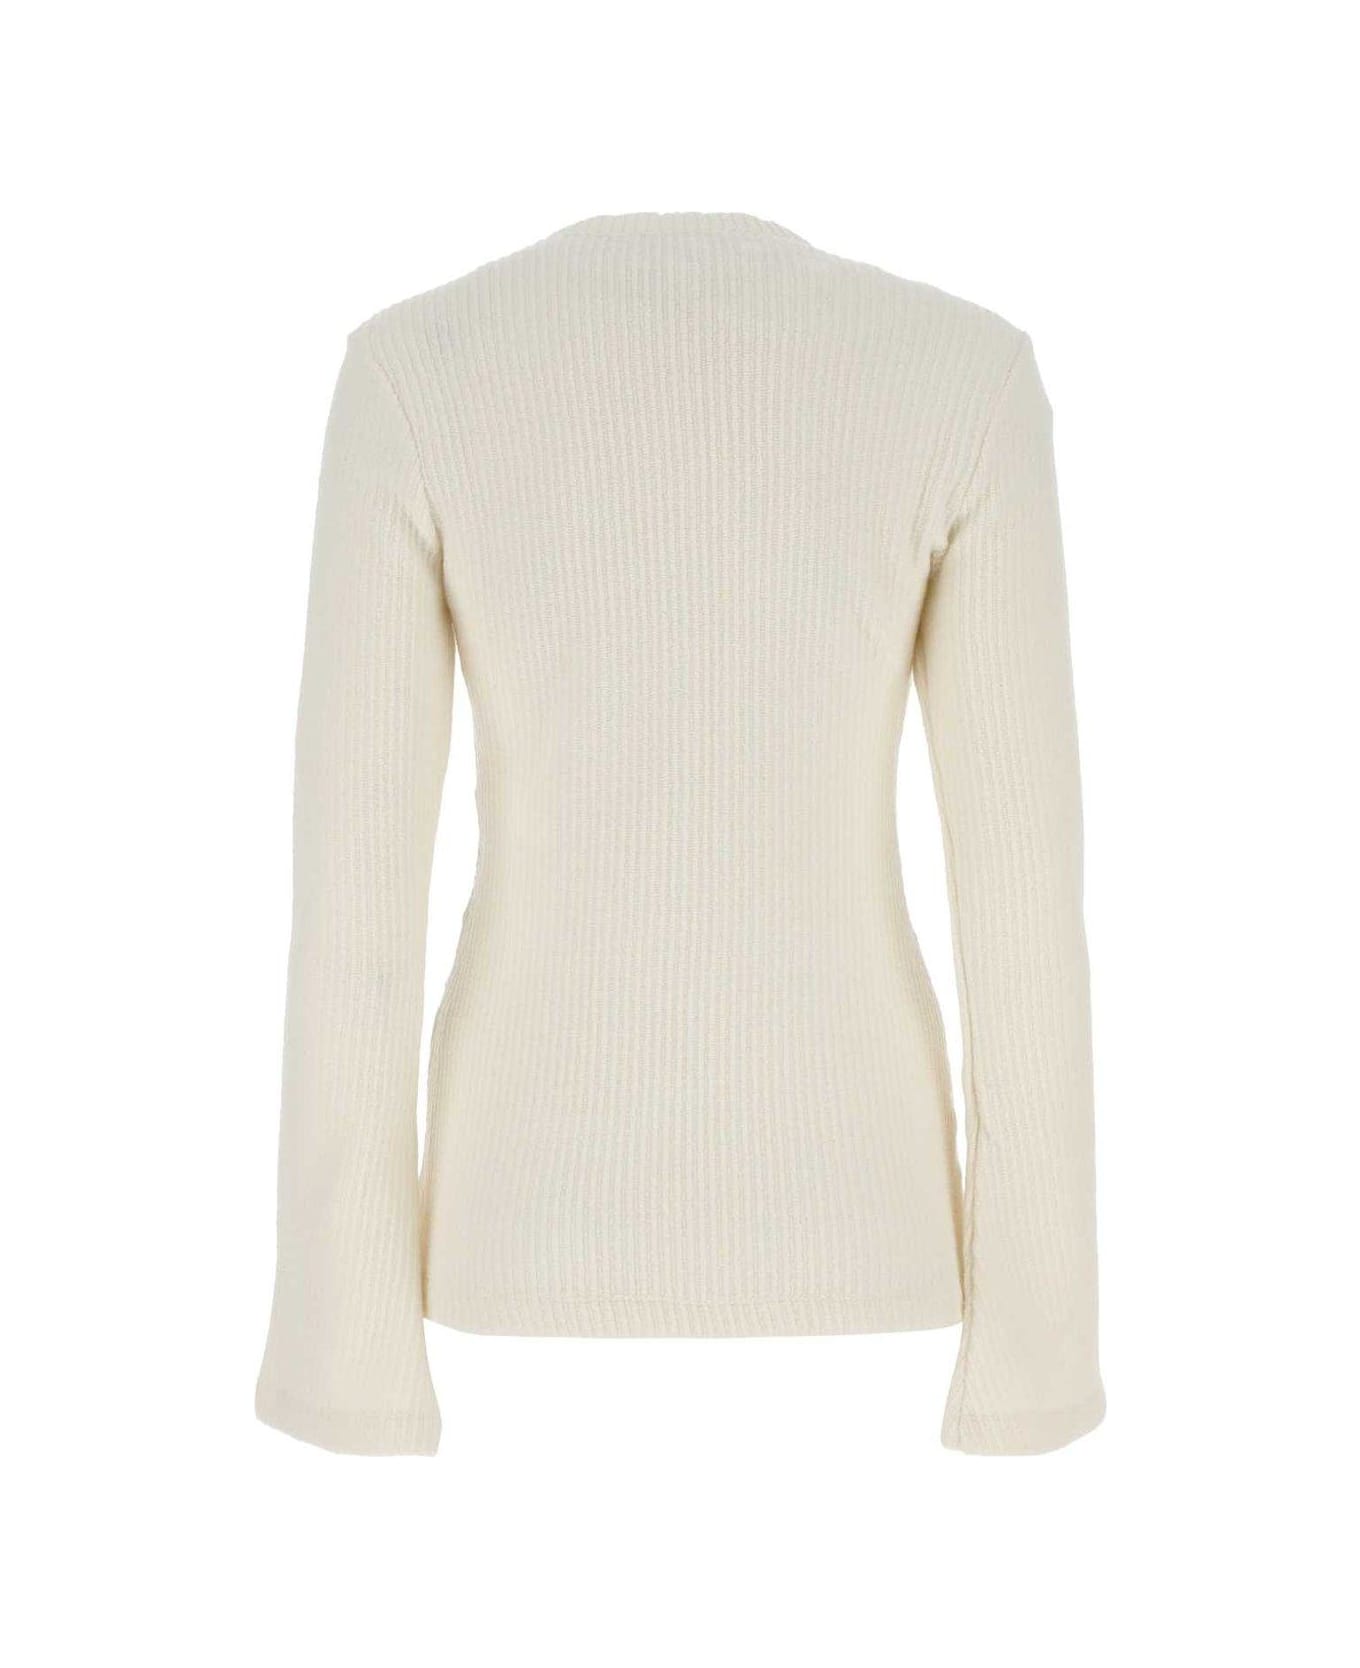 Chloé Flare Sleeved Knit Top - 112